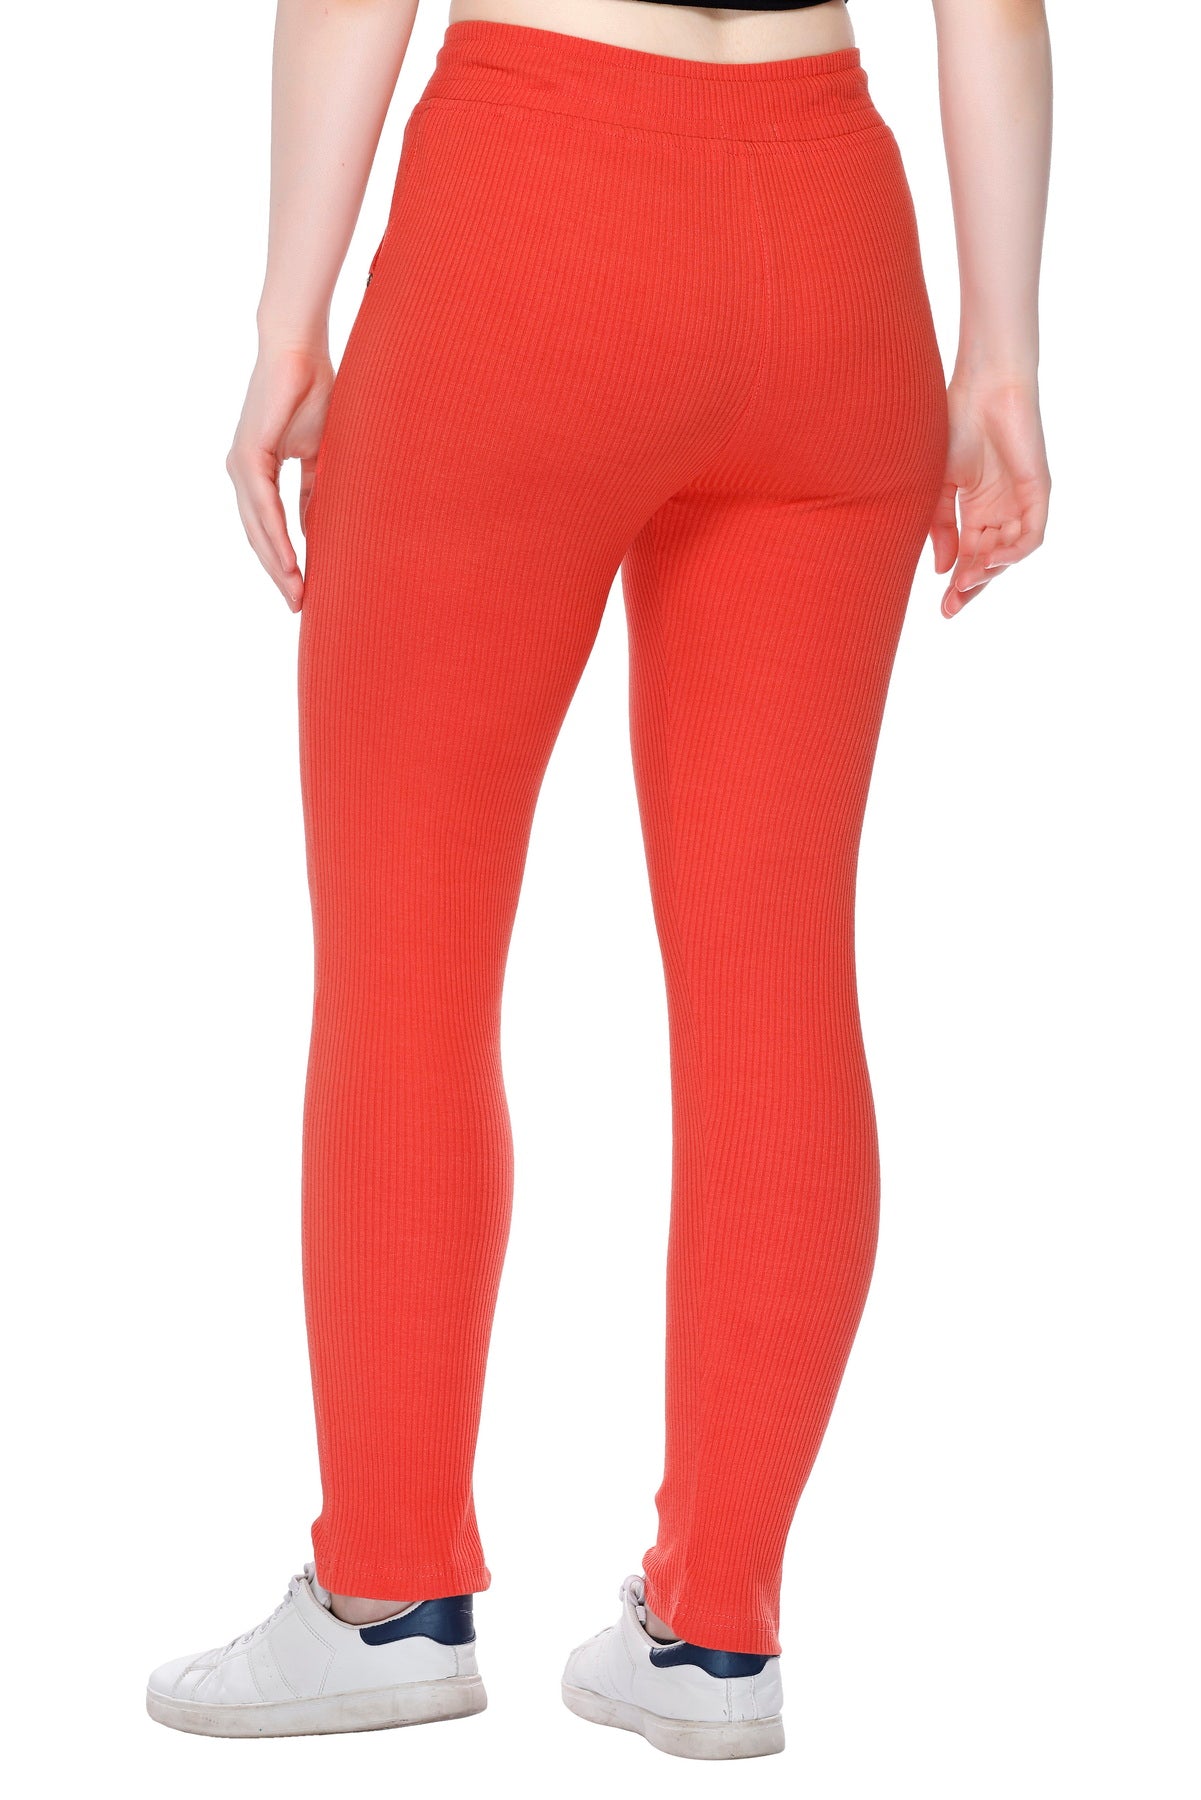 Buy INDIAN FLOWER Women Lycra Solid Green & Red Legging Online at Low  Prices in India - Paytmmall.com